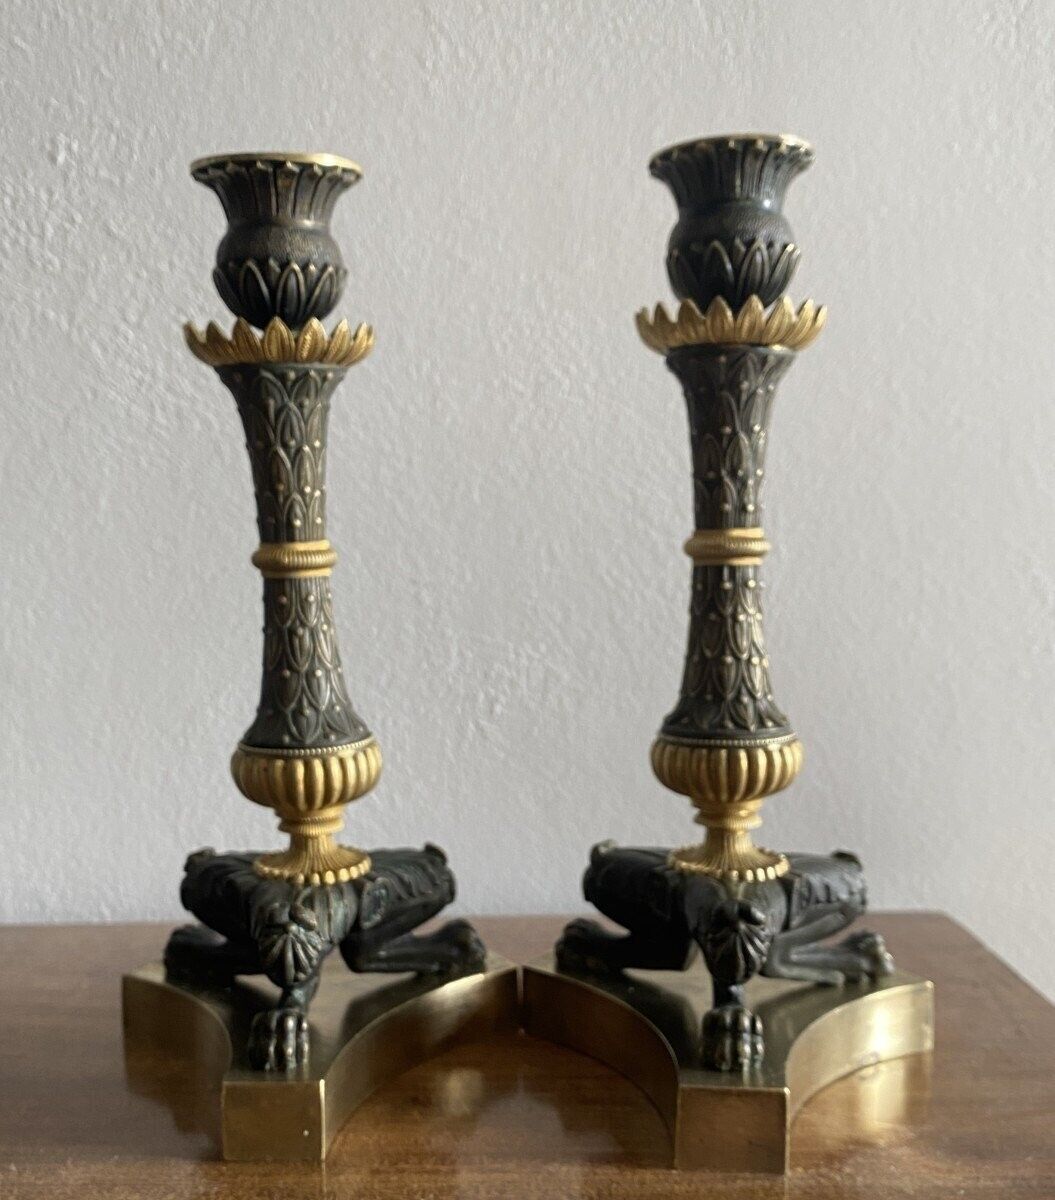 Pair of Antique Empire Period Bronze Candlesticks, Lion Paw Feet & Double Patina